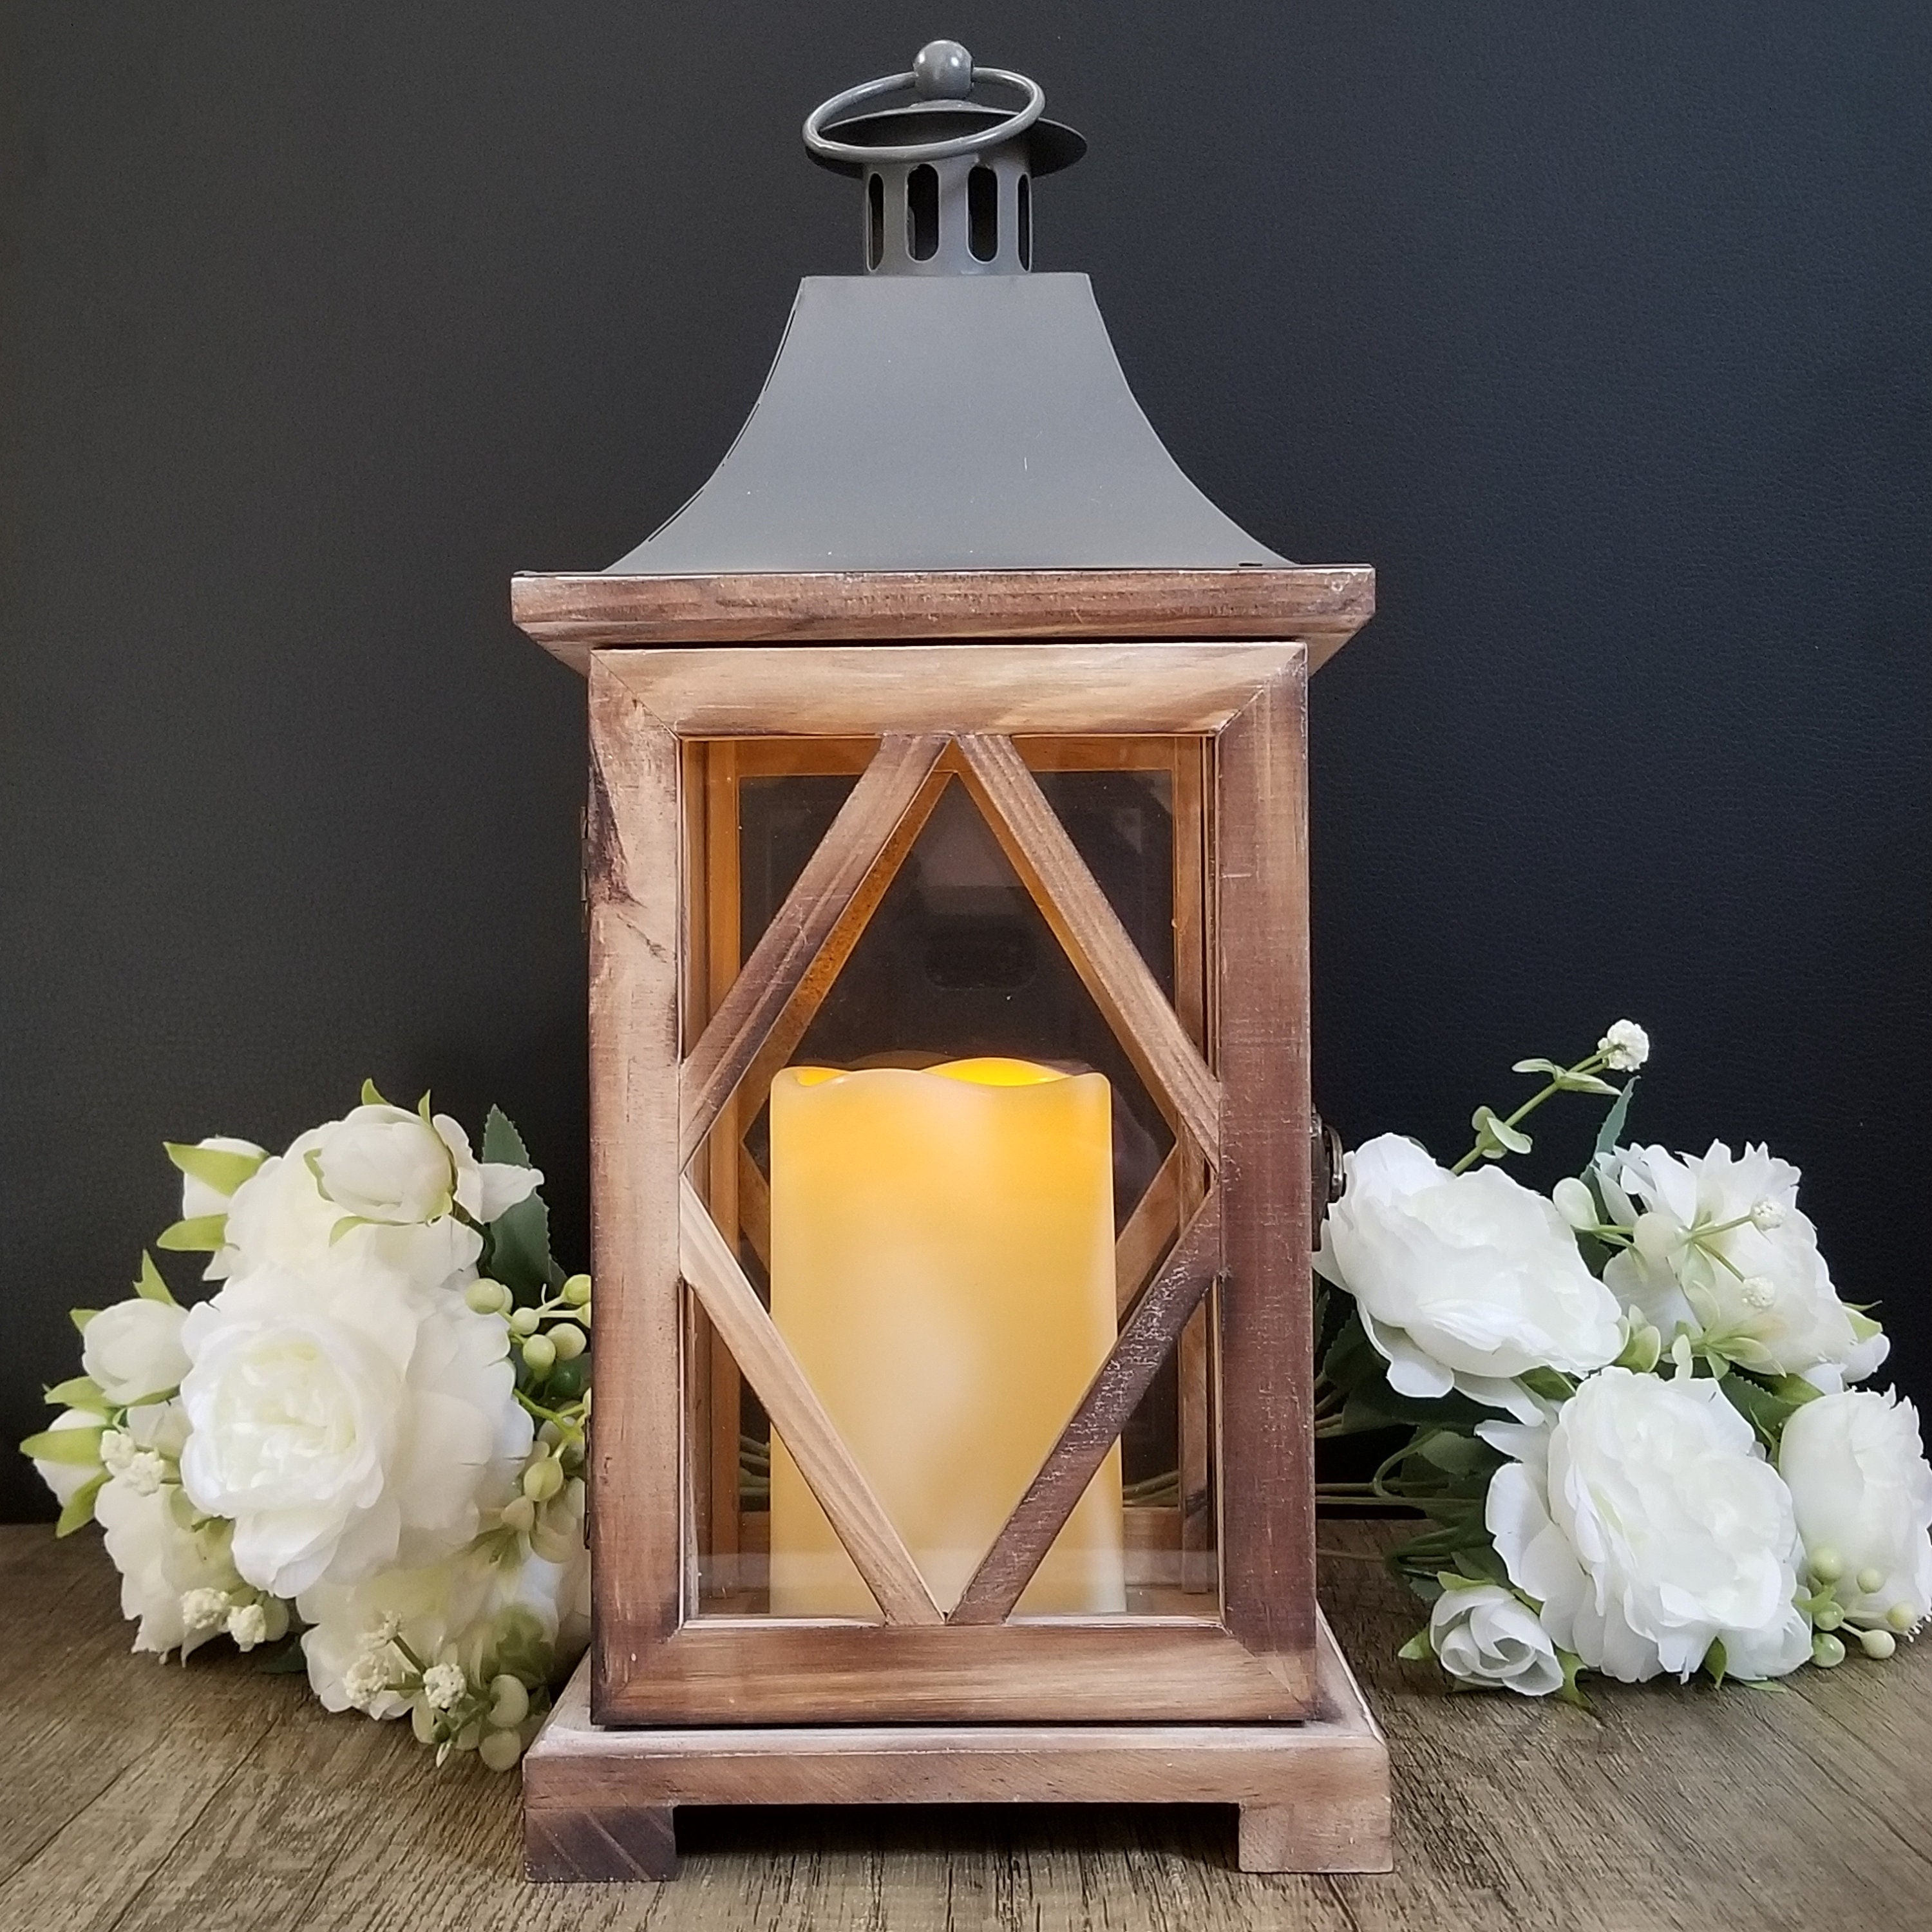 Wooden Candle Gray Lanterns Candle Decorative Holder Set of 2 for Indoor Outdoor, Home Garden Wedding